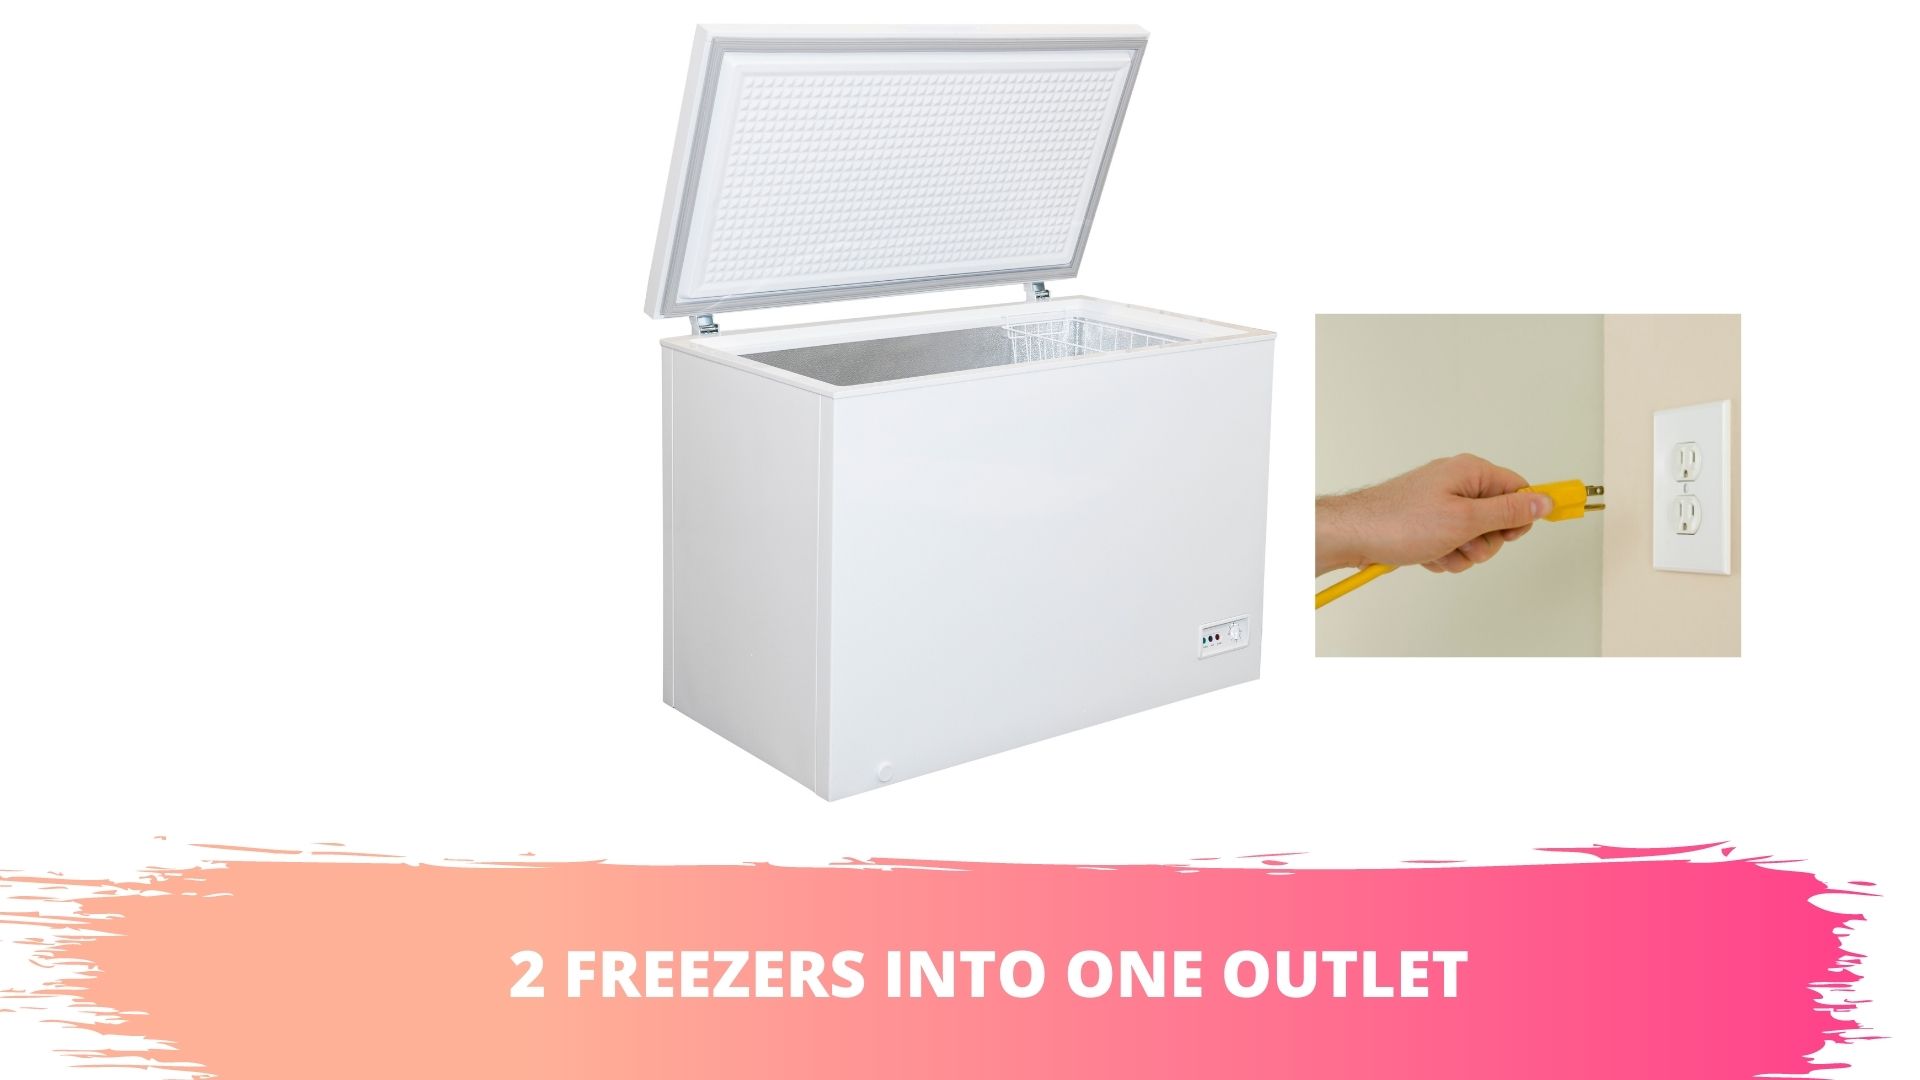 2 freezers on one outlet